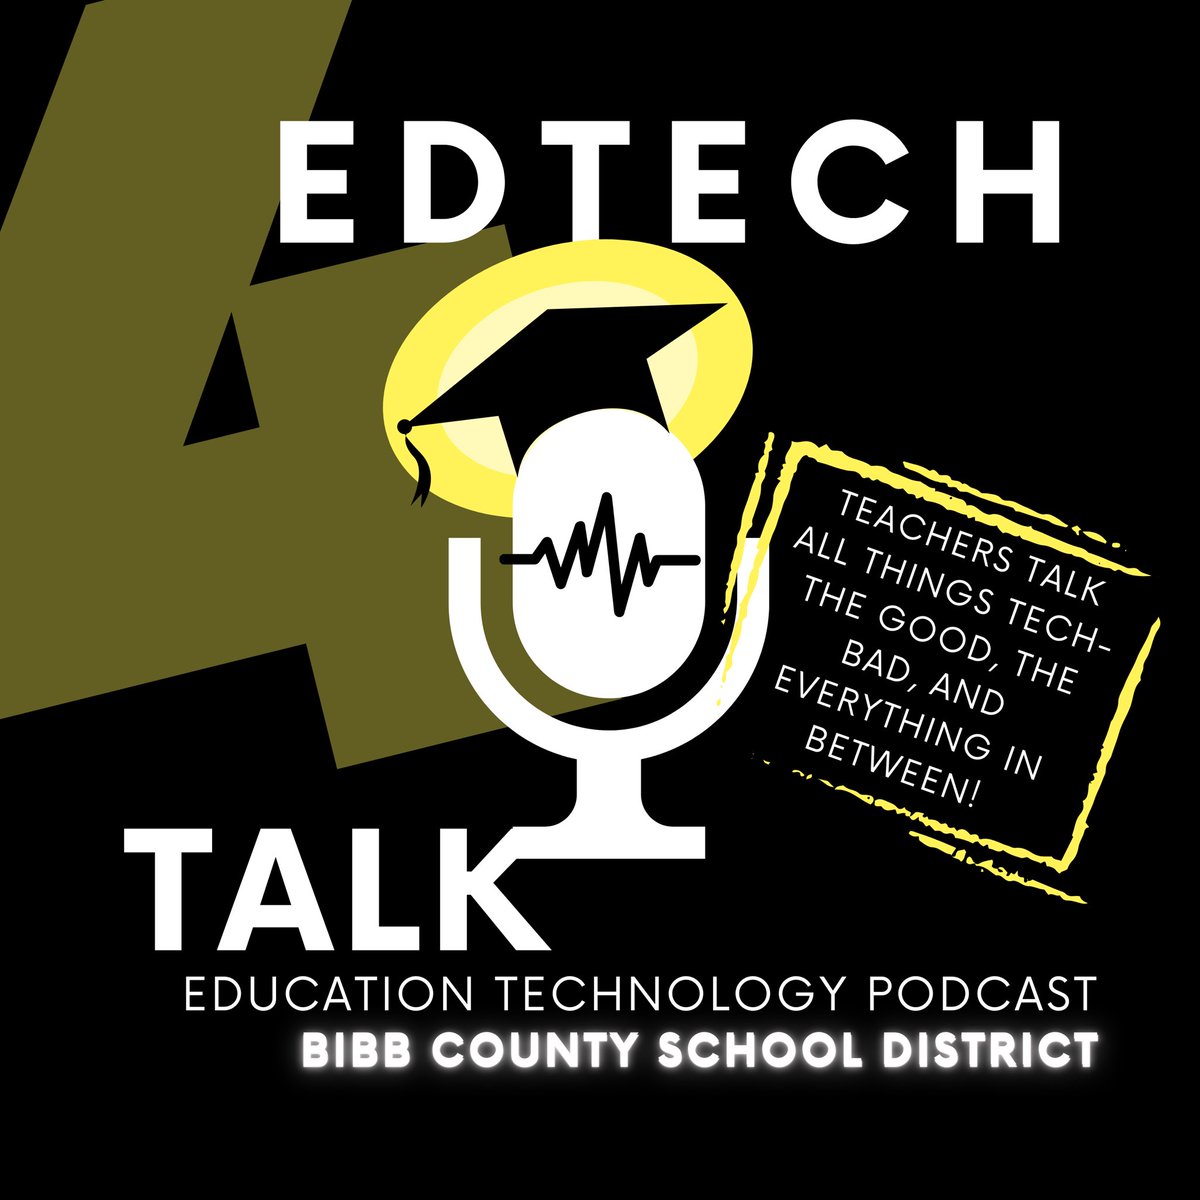 Episode 4 is out now! Featuring two teachers from @Miller_Magnet ! Check out their tech journey, it’s a great one! @BibbSchools @usabbs @LumioSocial @PodcastleAI @anchor @PlayCraftLearn #podcast #edtech #edtechpodcast anchor.fm/edtechtalkbibb